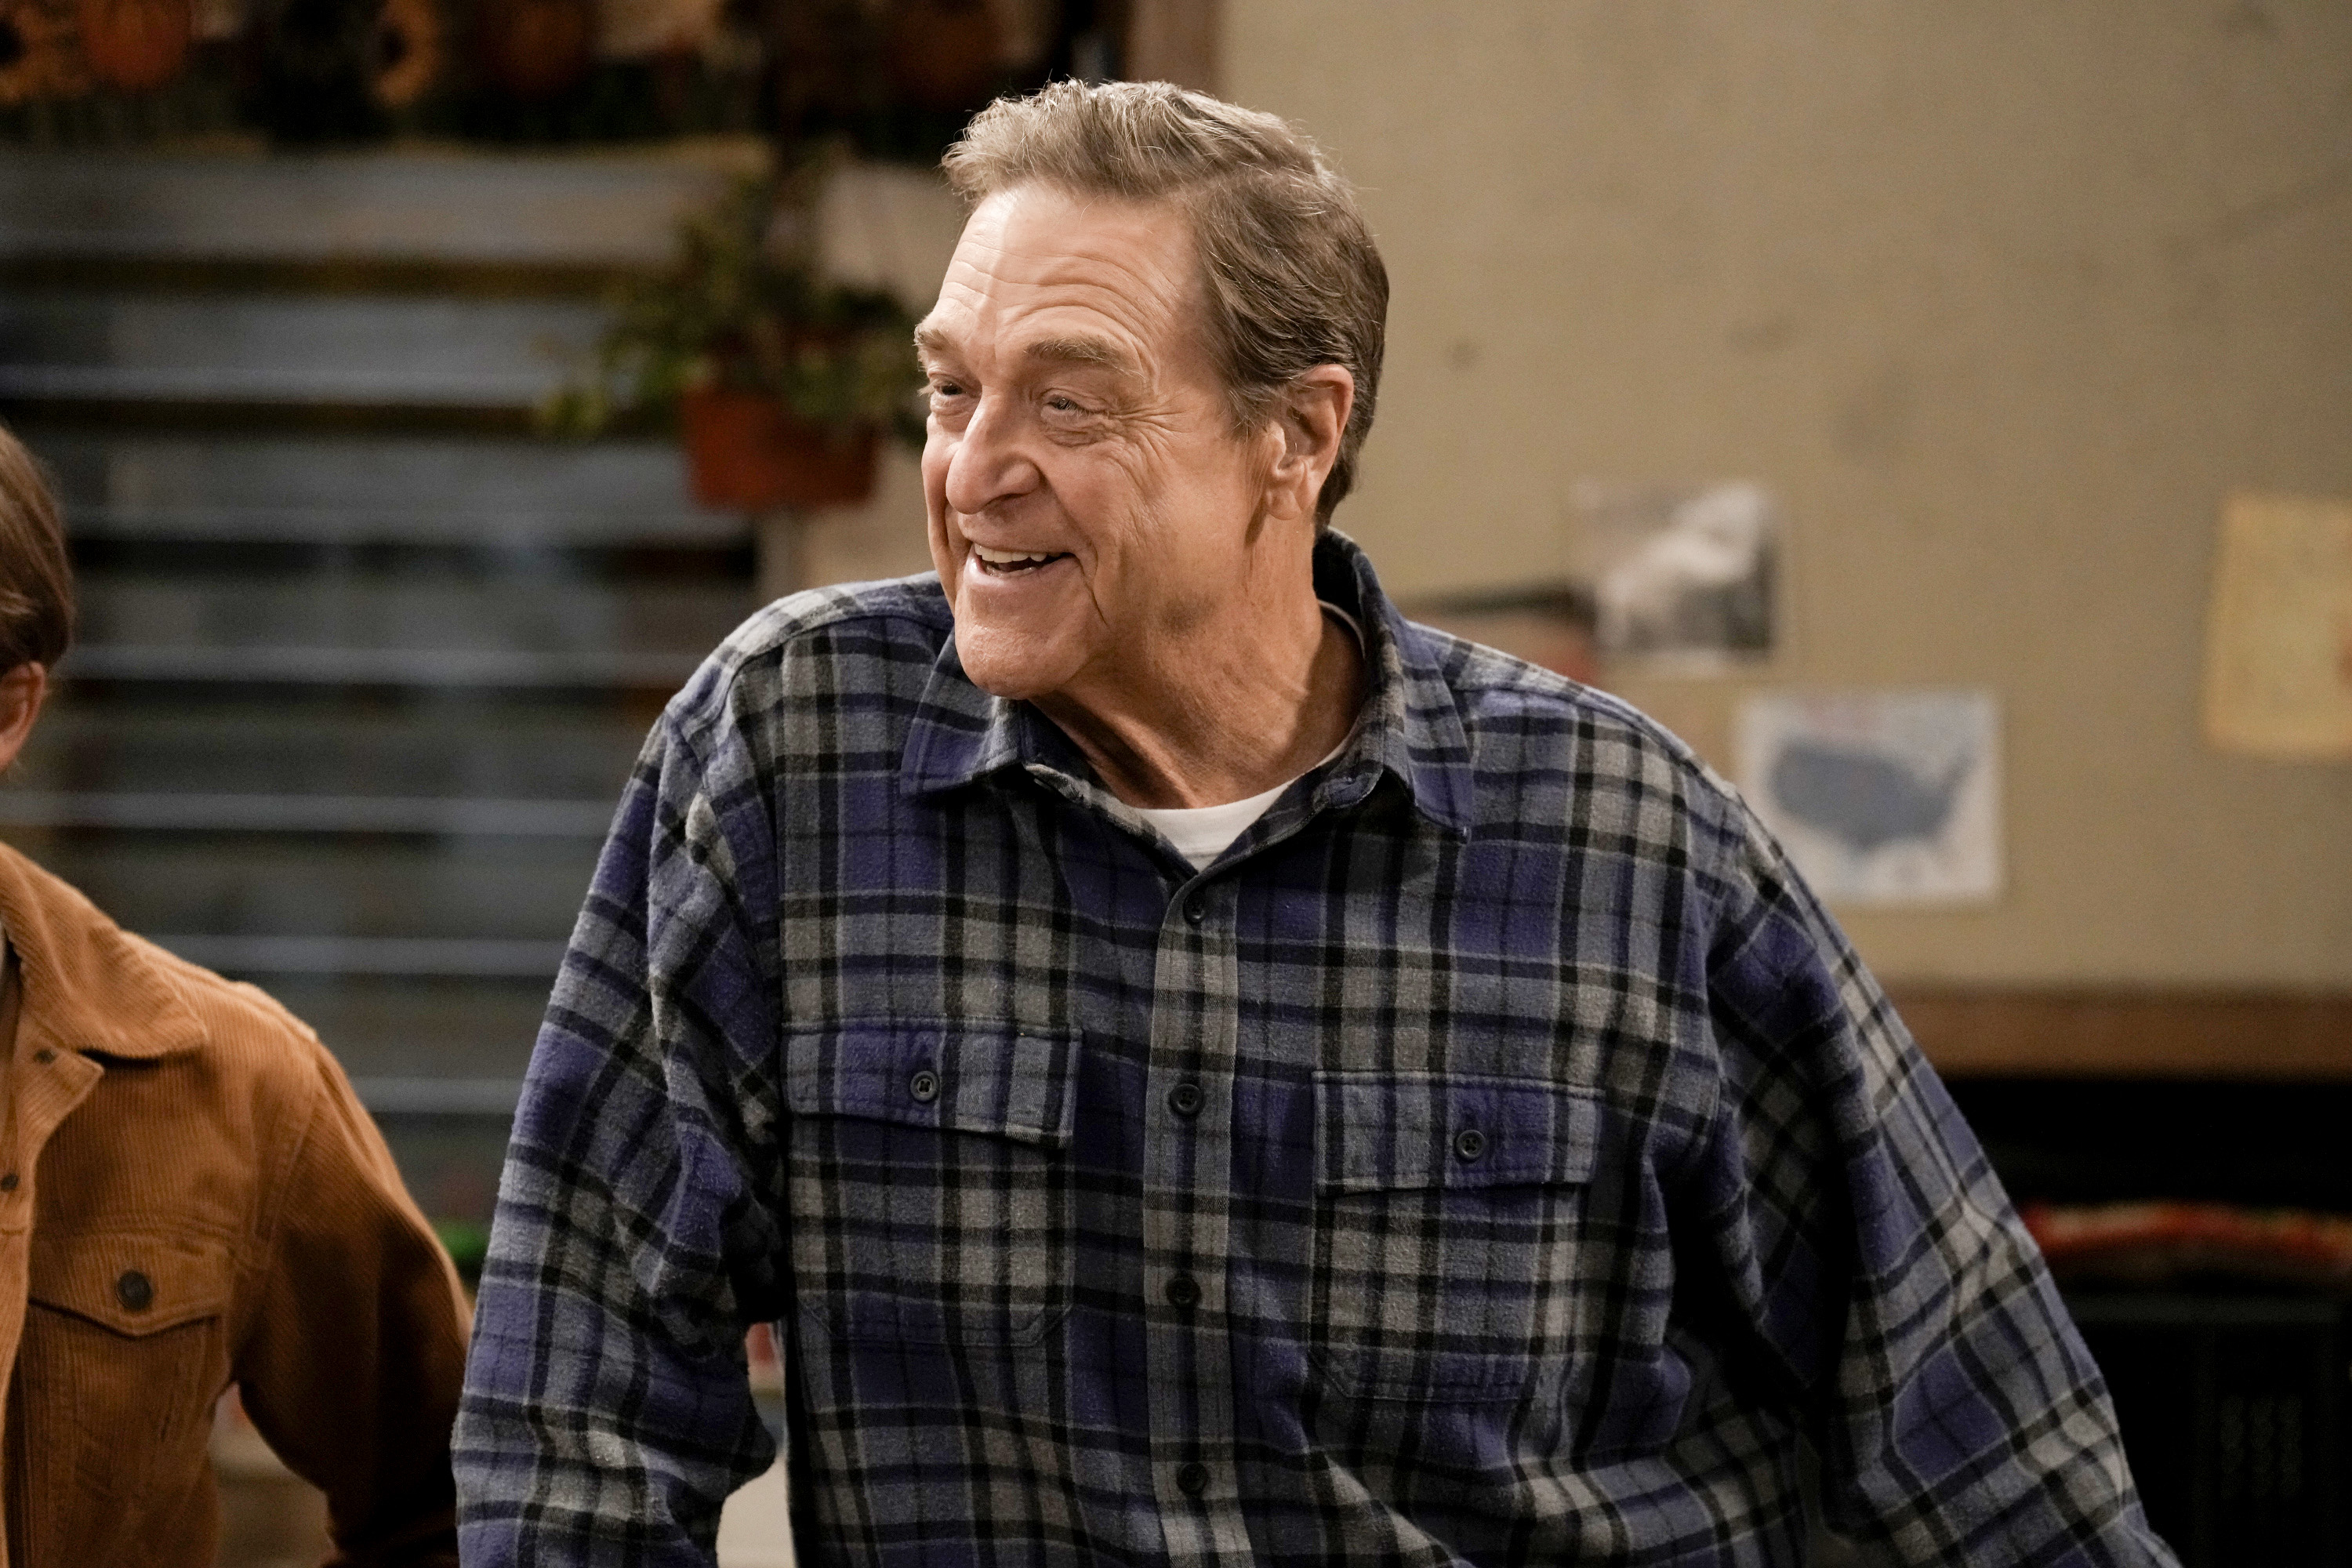 John Goodman as Dan Conner in ABC's 2018 TV show "The Conners." | Source: Getty Images